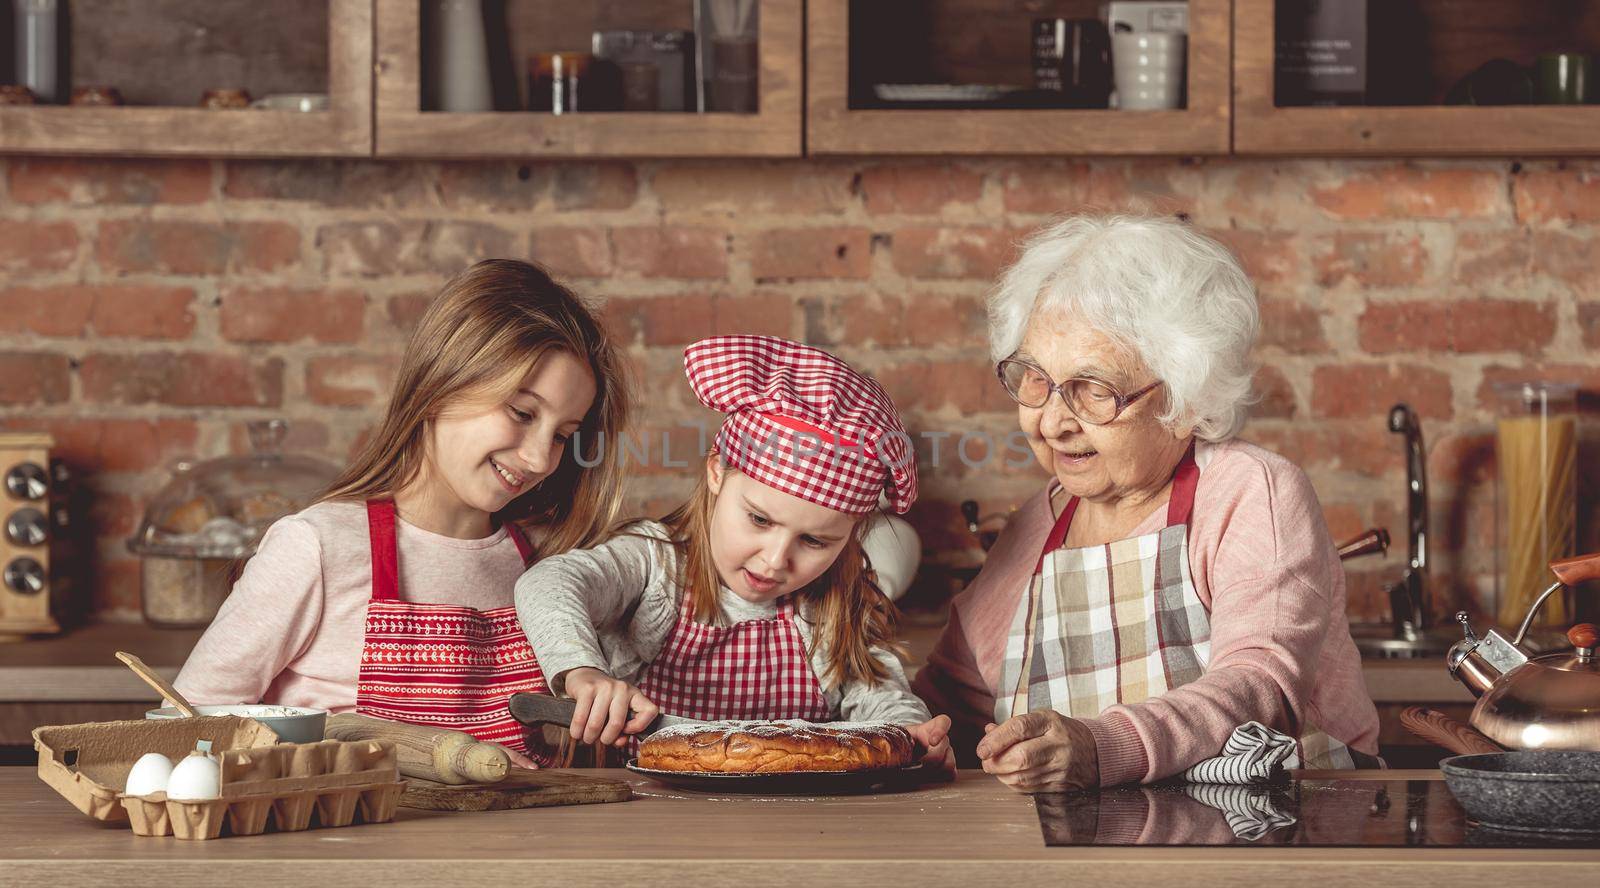 Granny with her lovely granddaughters tasting delicious homemade pie at kitchen